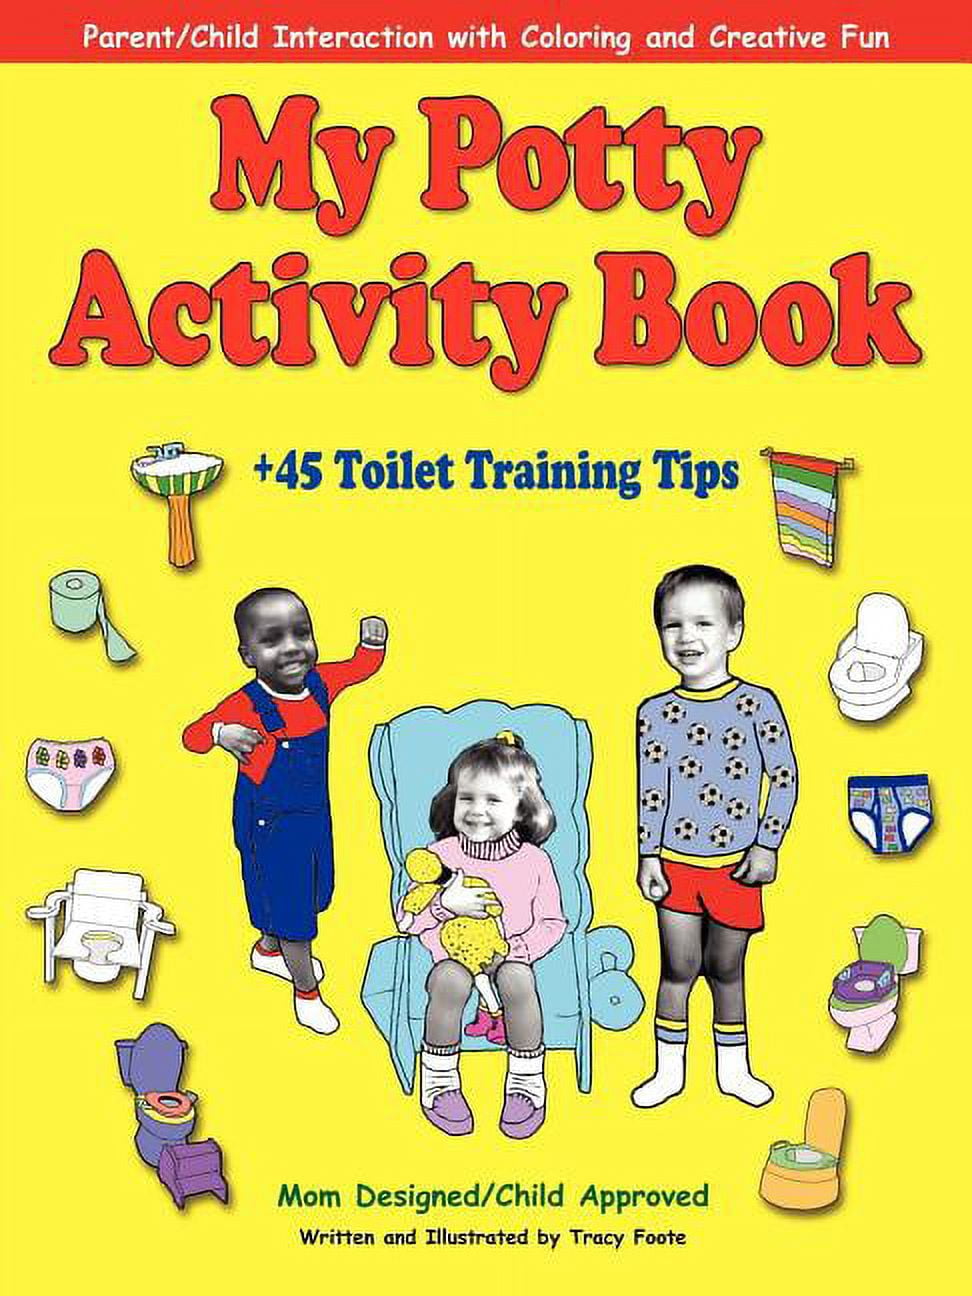 toilet training tips for babies My potty activity book +45 toilet training tips: potty training